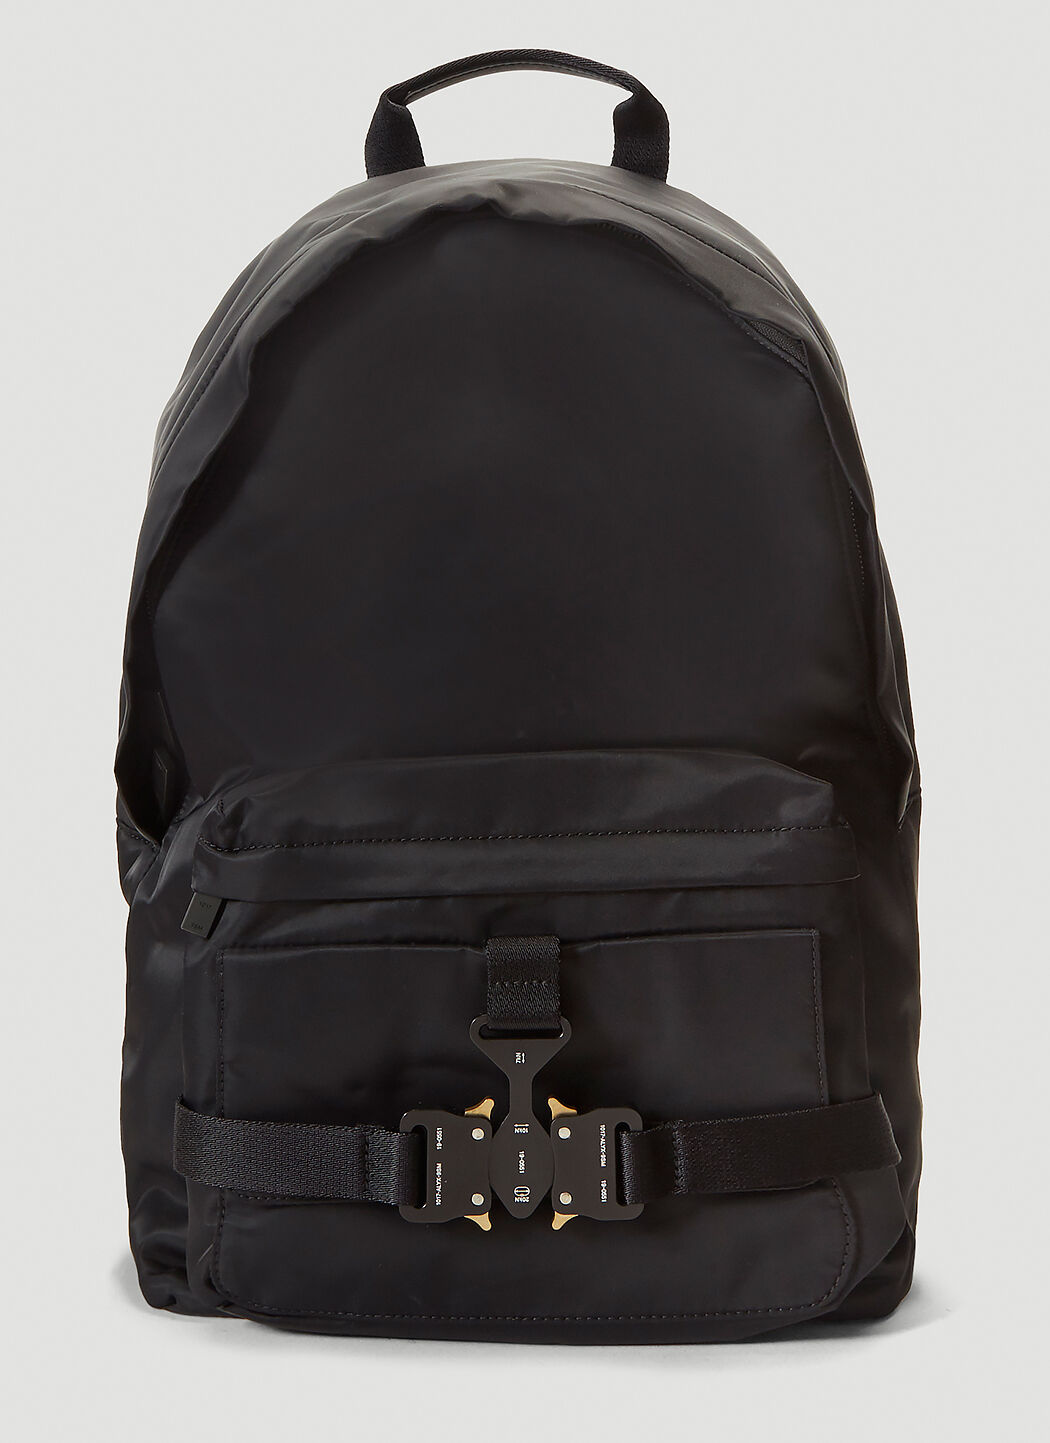 1017 ALYX 9SM Tricon Backpack 그레이 aly0152002